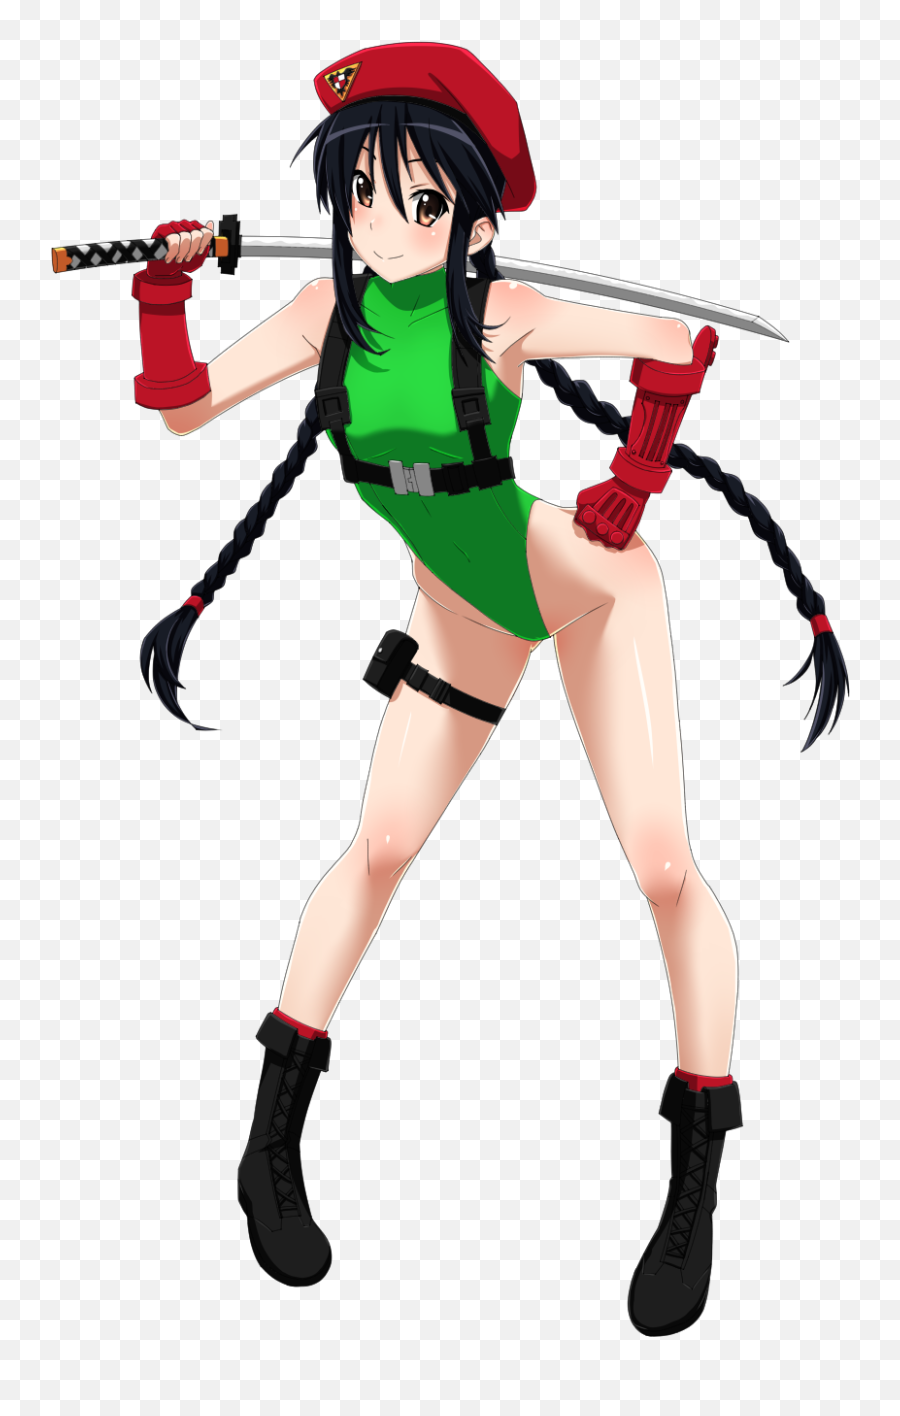 Cammy White And Shana Street Fighter And 1 More Drawn By Emoji,Cammy Png